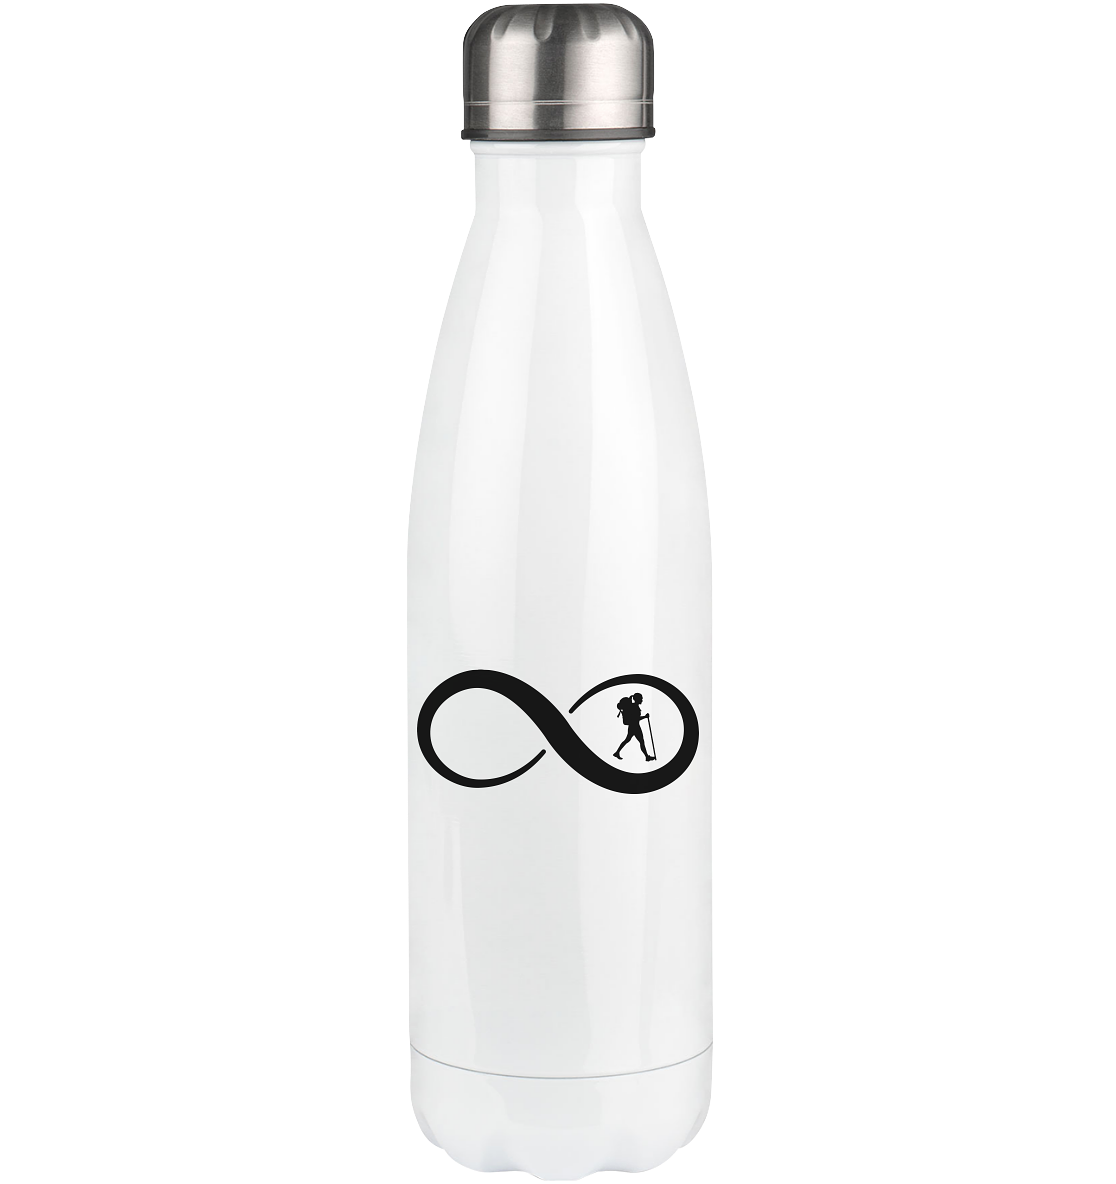 Infinity and Hiking 1 - Edelstahl Thermosflasche wandern 500ml